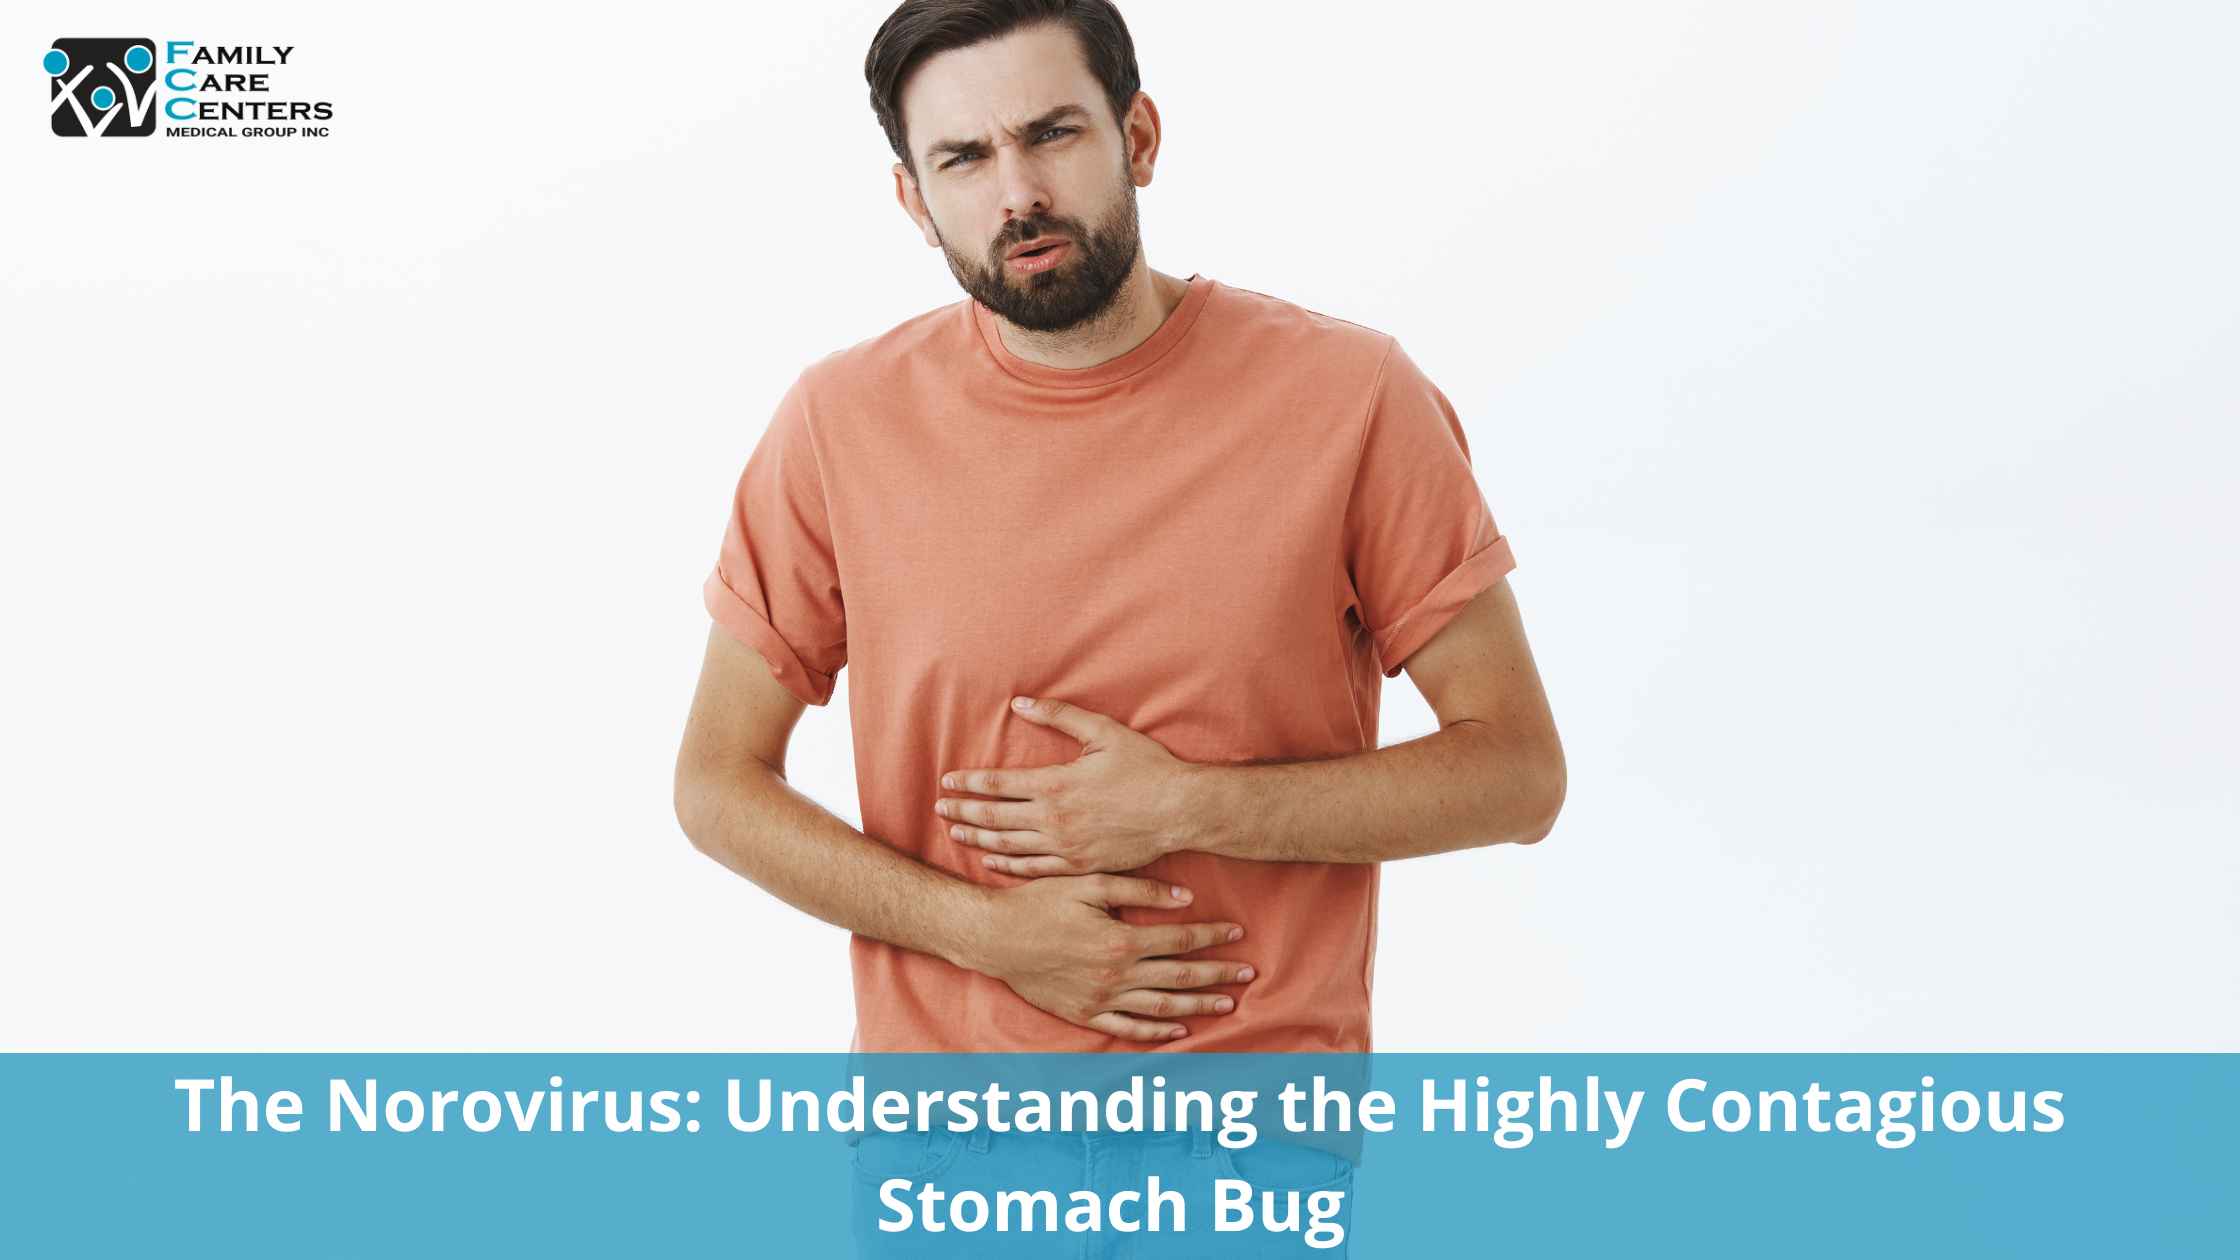 The Norovirus: Understanding the Highly Contagious Stomach Bug